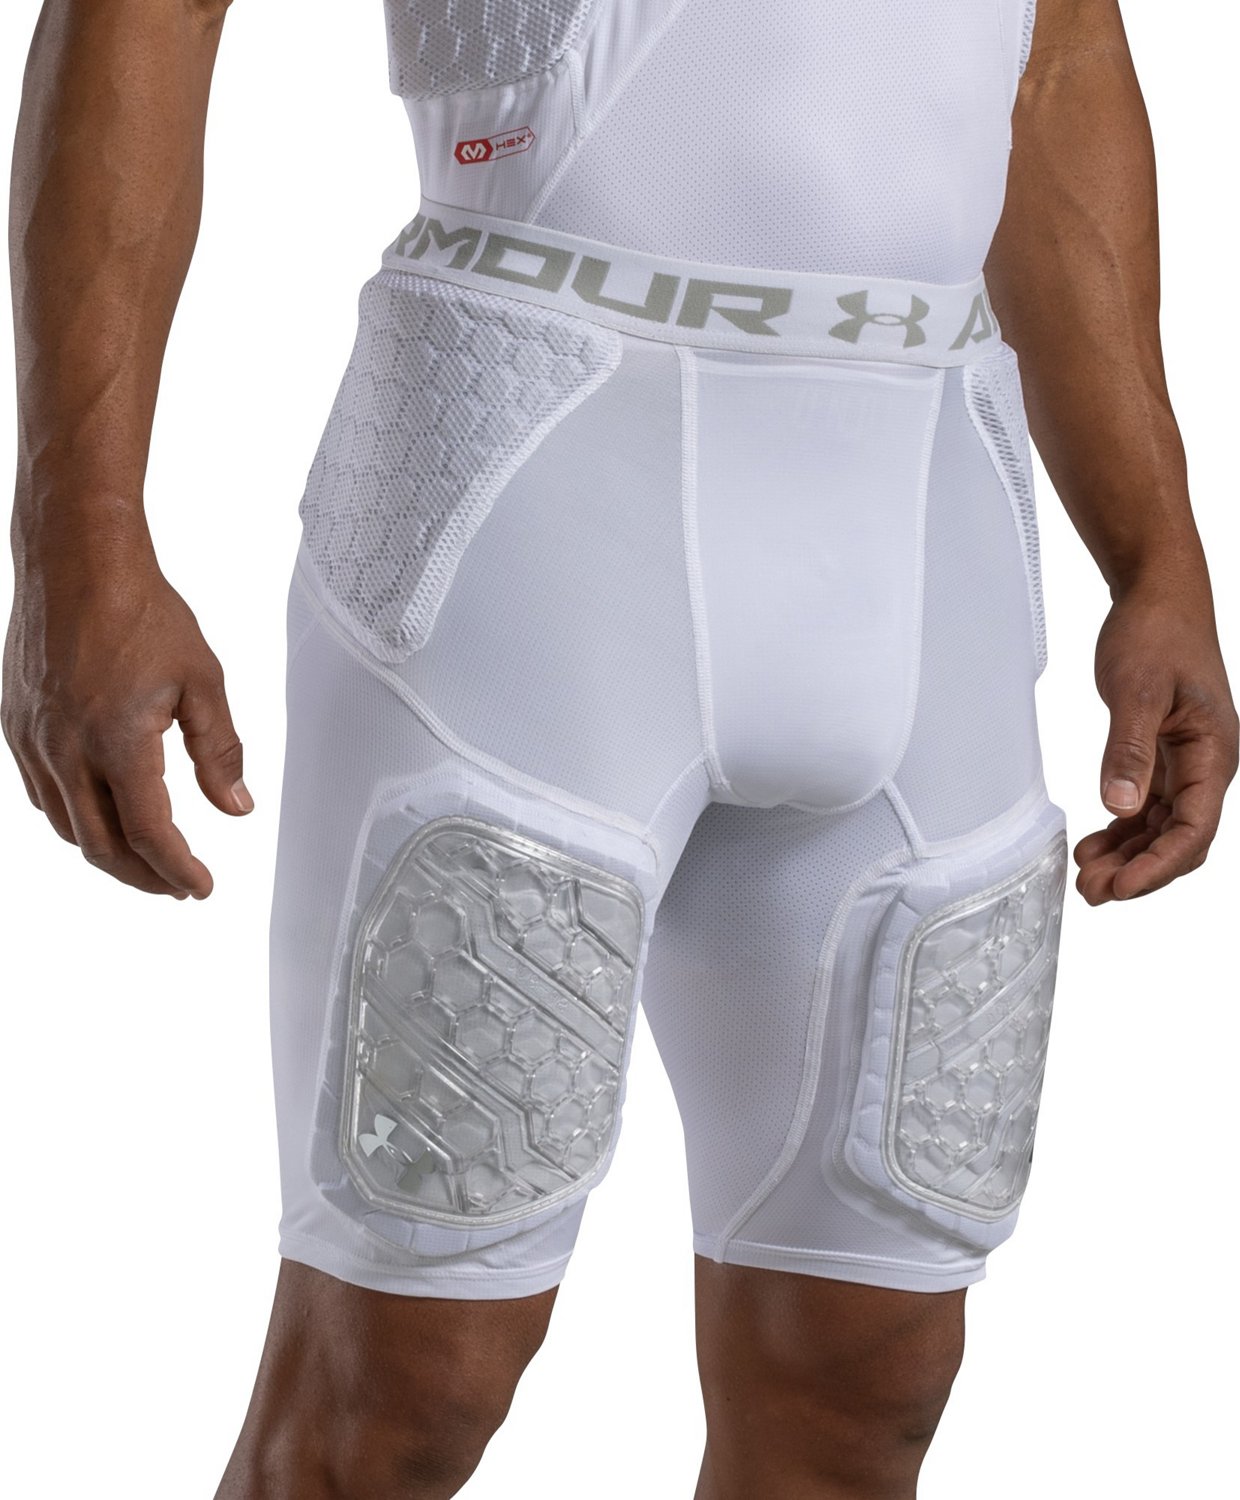 Under Armour Adults Gameday Armour Pro 5-Pad Girdle